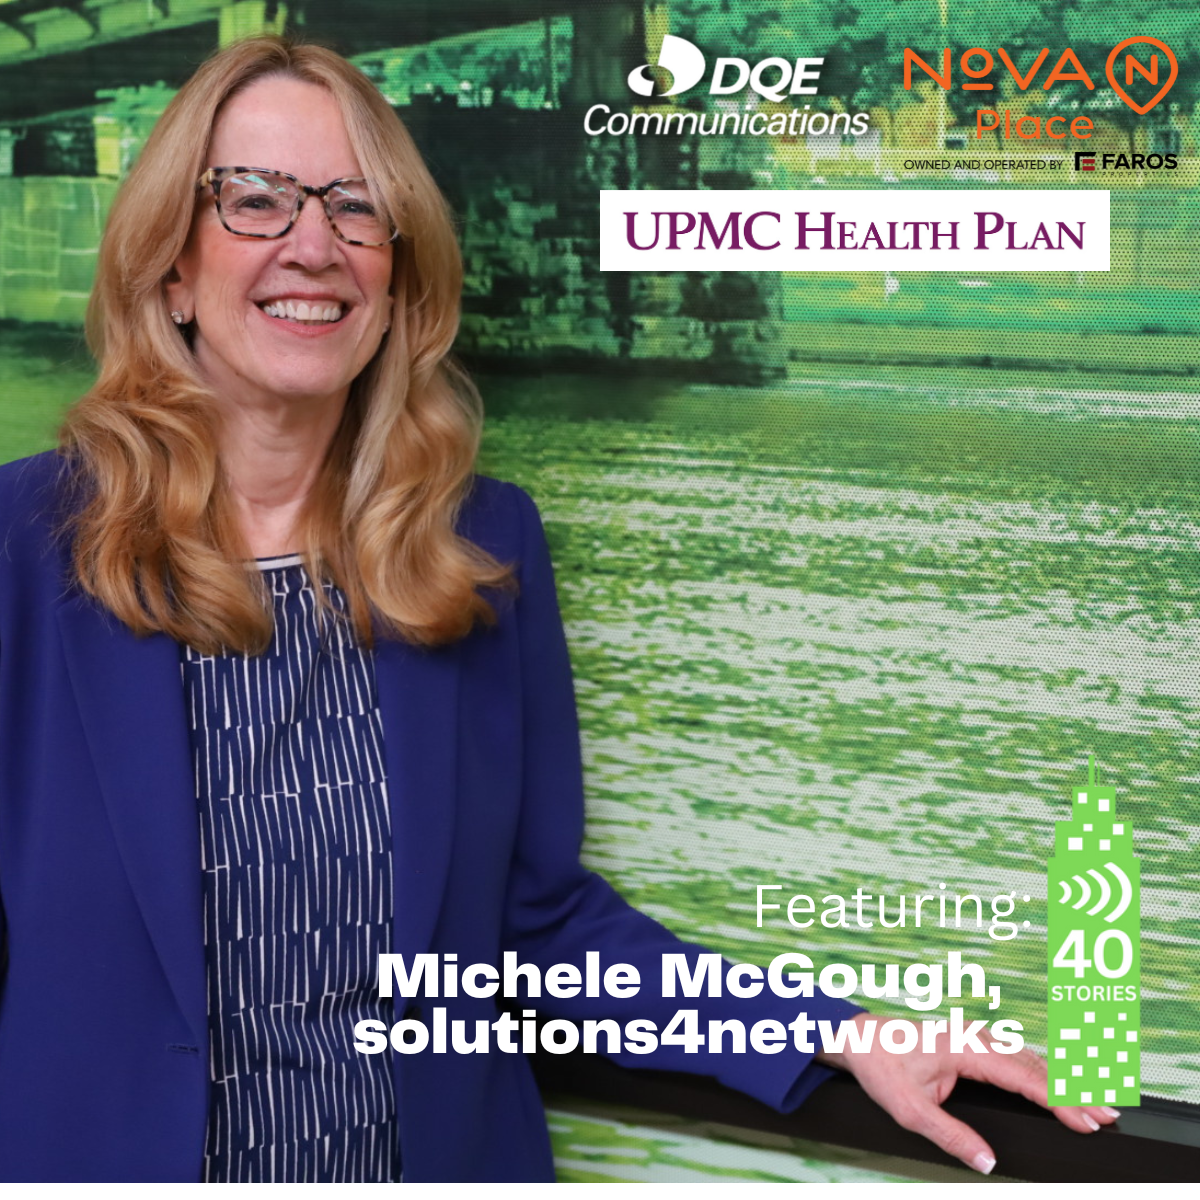 Michele McGough Solutions4networks